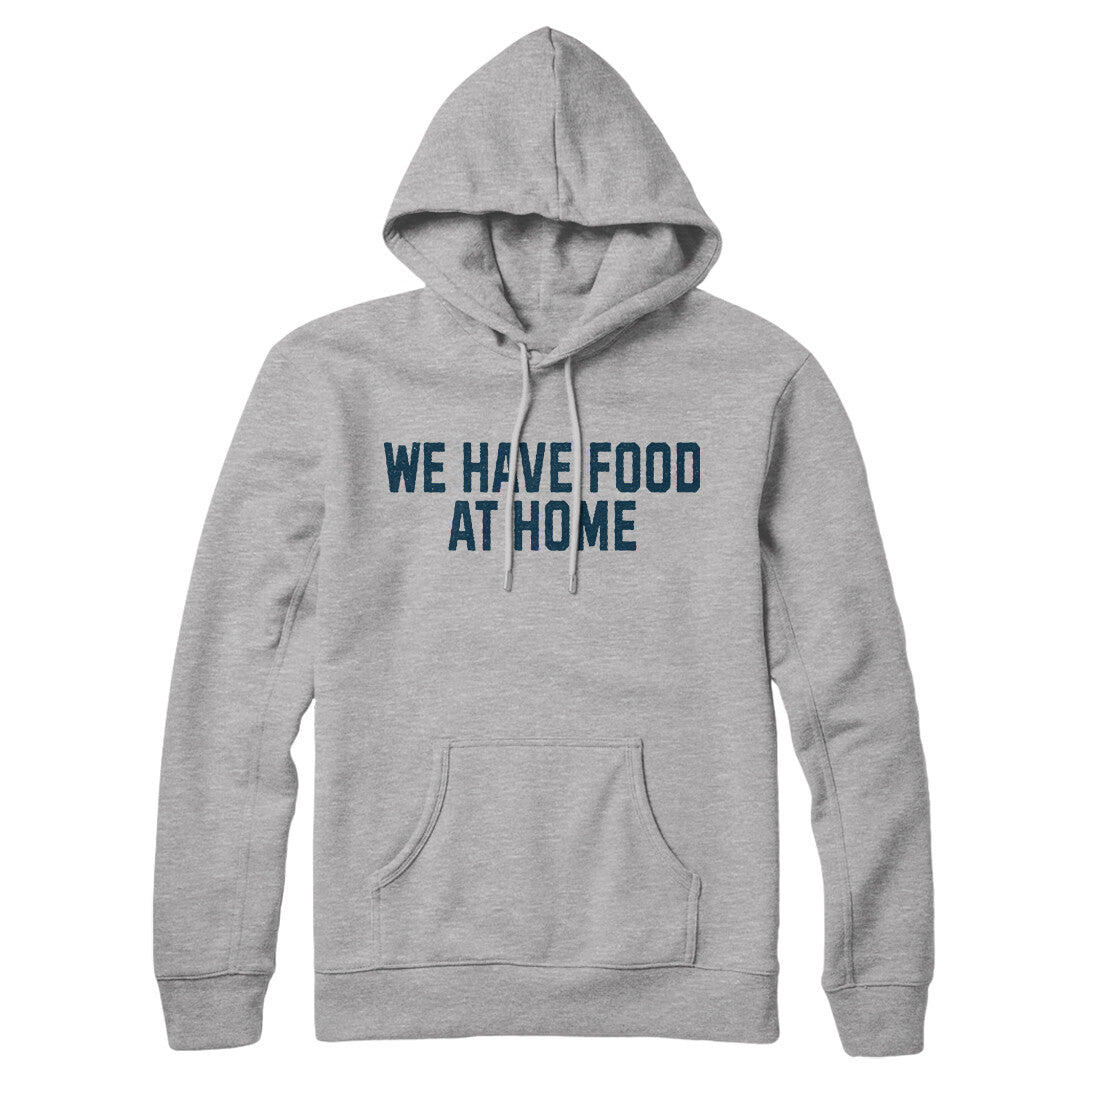 We Have Food at Home in Heather Grey Color